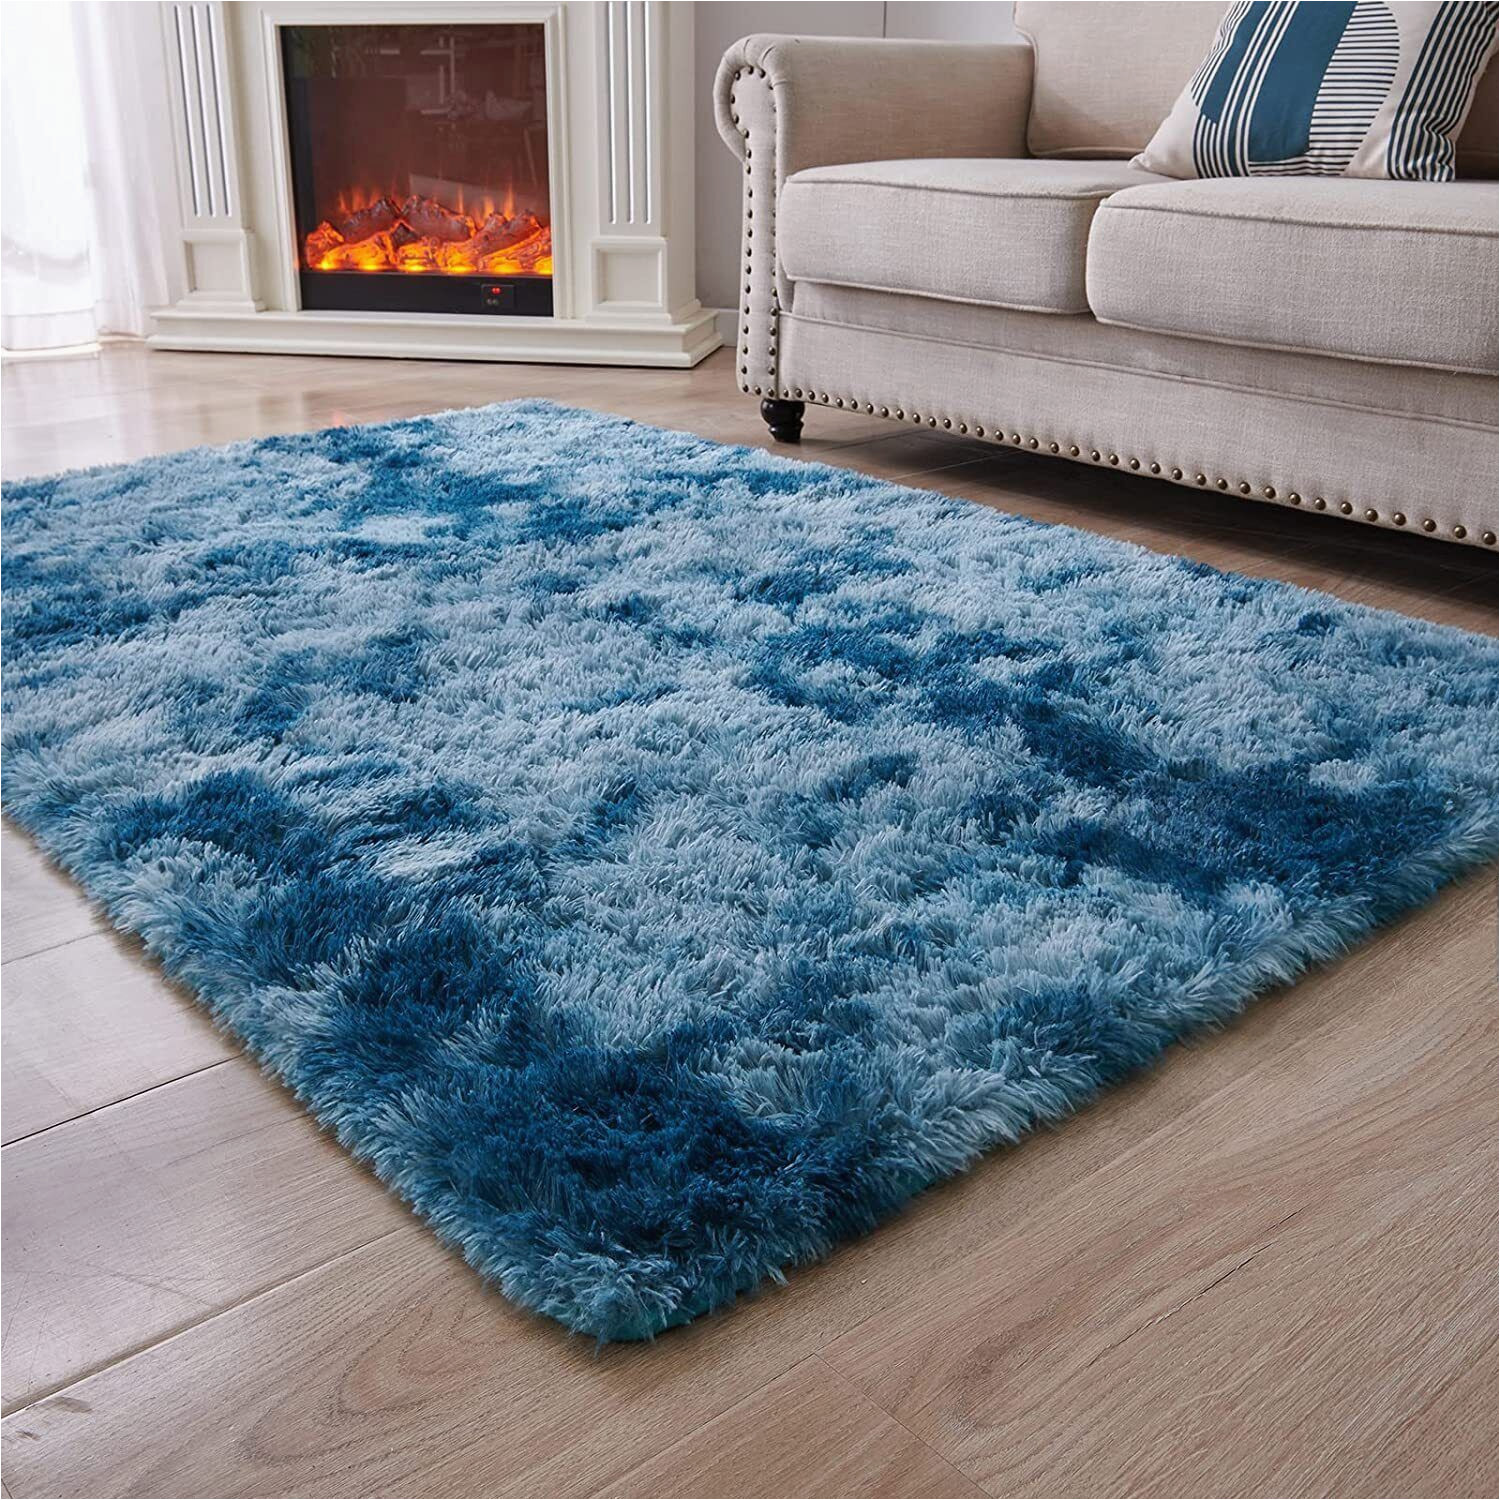 Blue Shaggy Rug for Sale Blue Shag area Rug 8×10 Clearance for Living Room Large Modern Reduced Price New